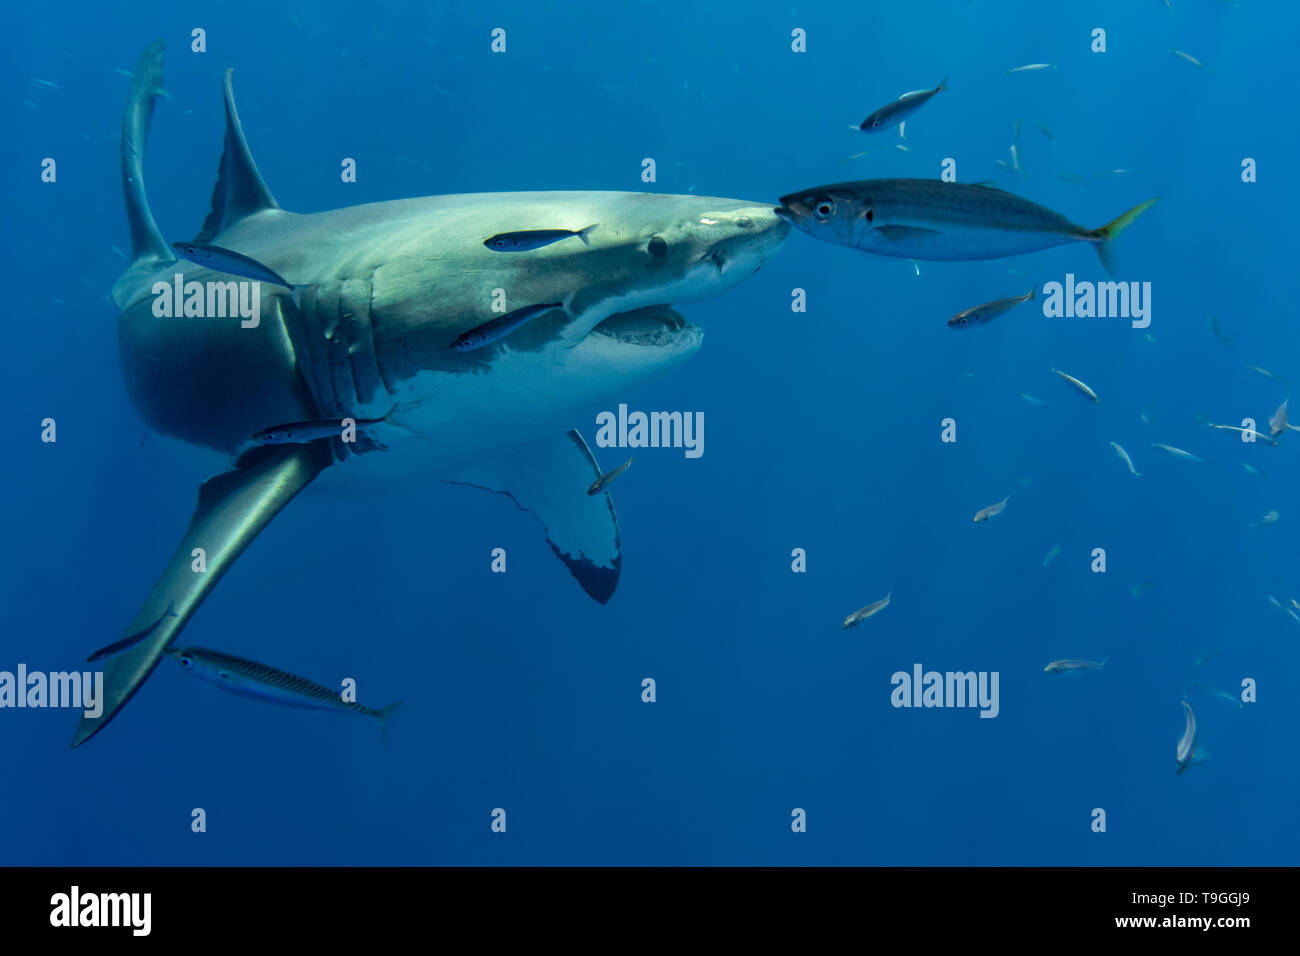 Great white shark, Carcharodon carcharias, swimming off the coast of Isla Guadelupe, Mexico. Stock Photo